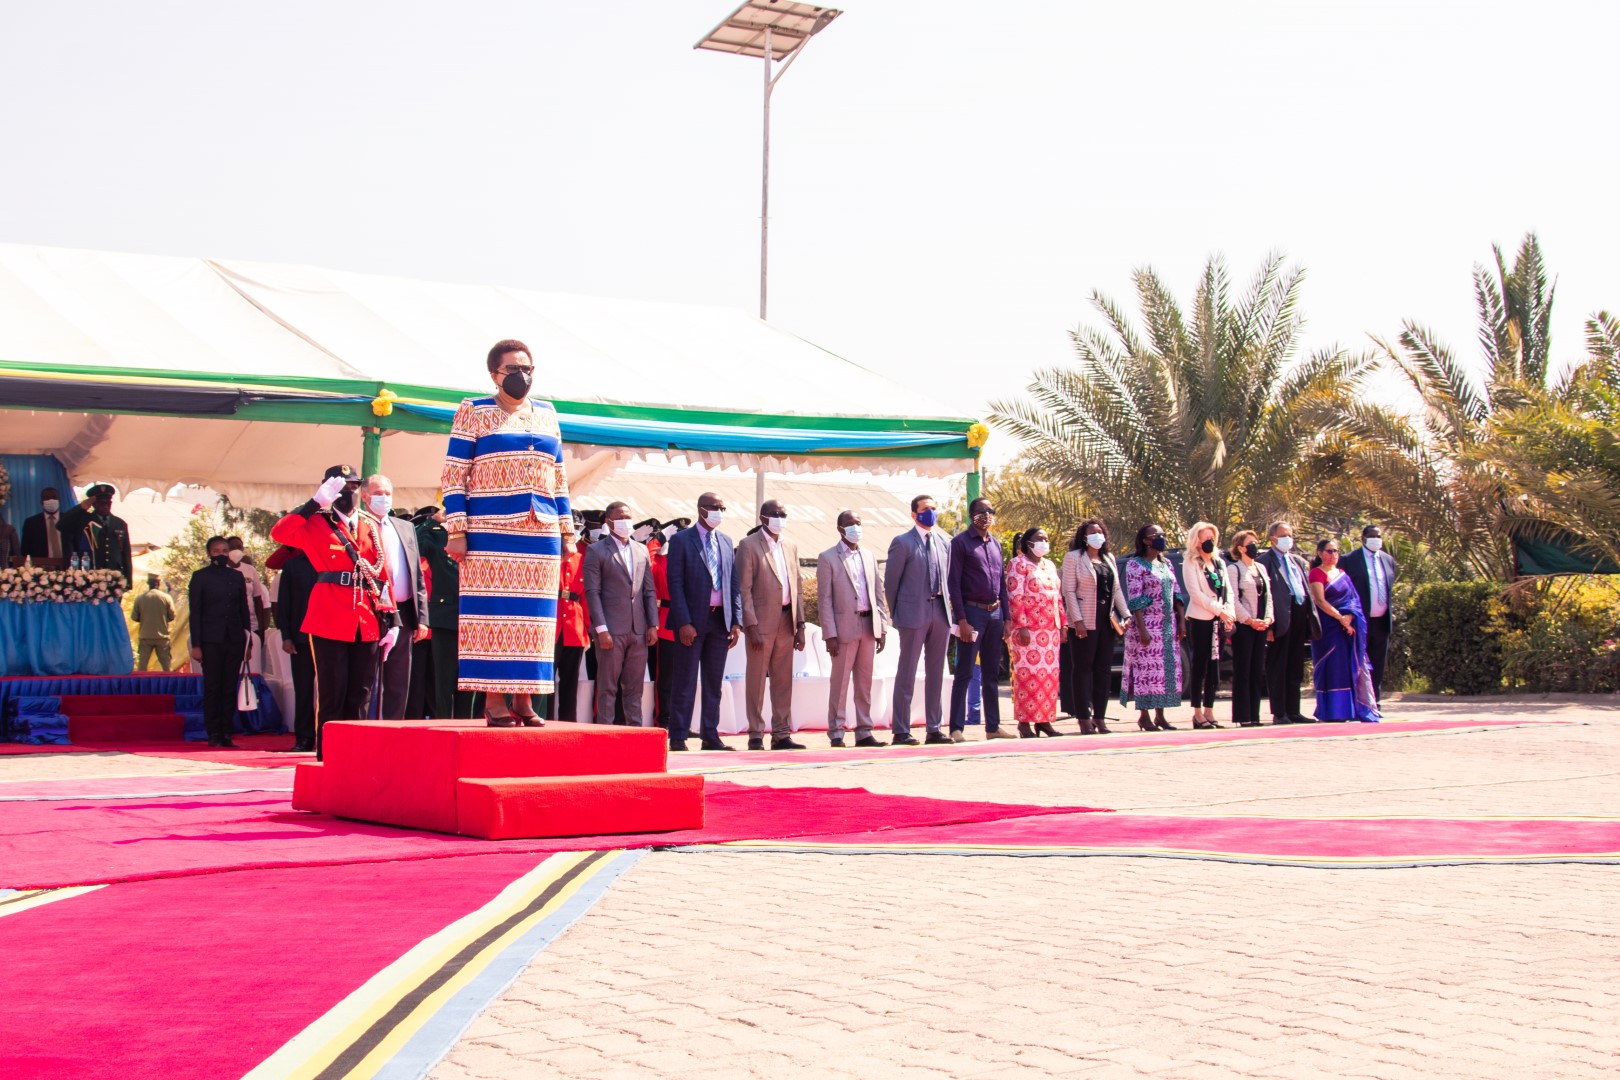 United Nations Day National Commemorations in Dodoma